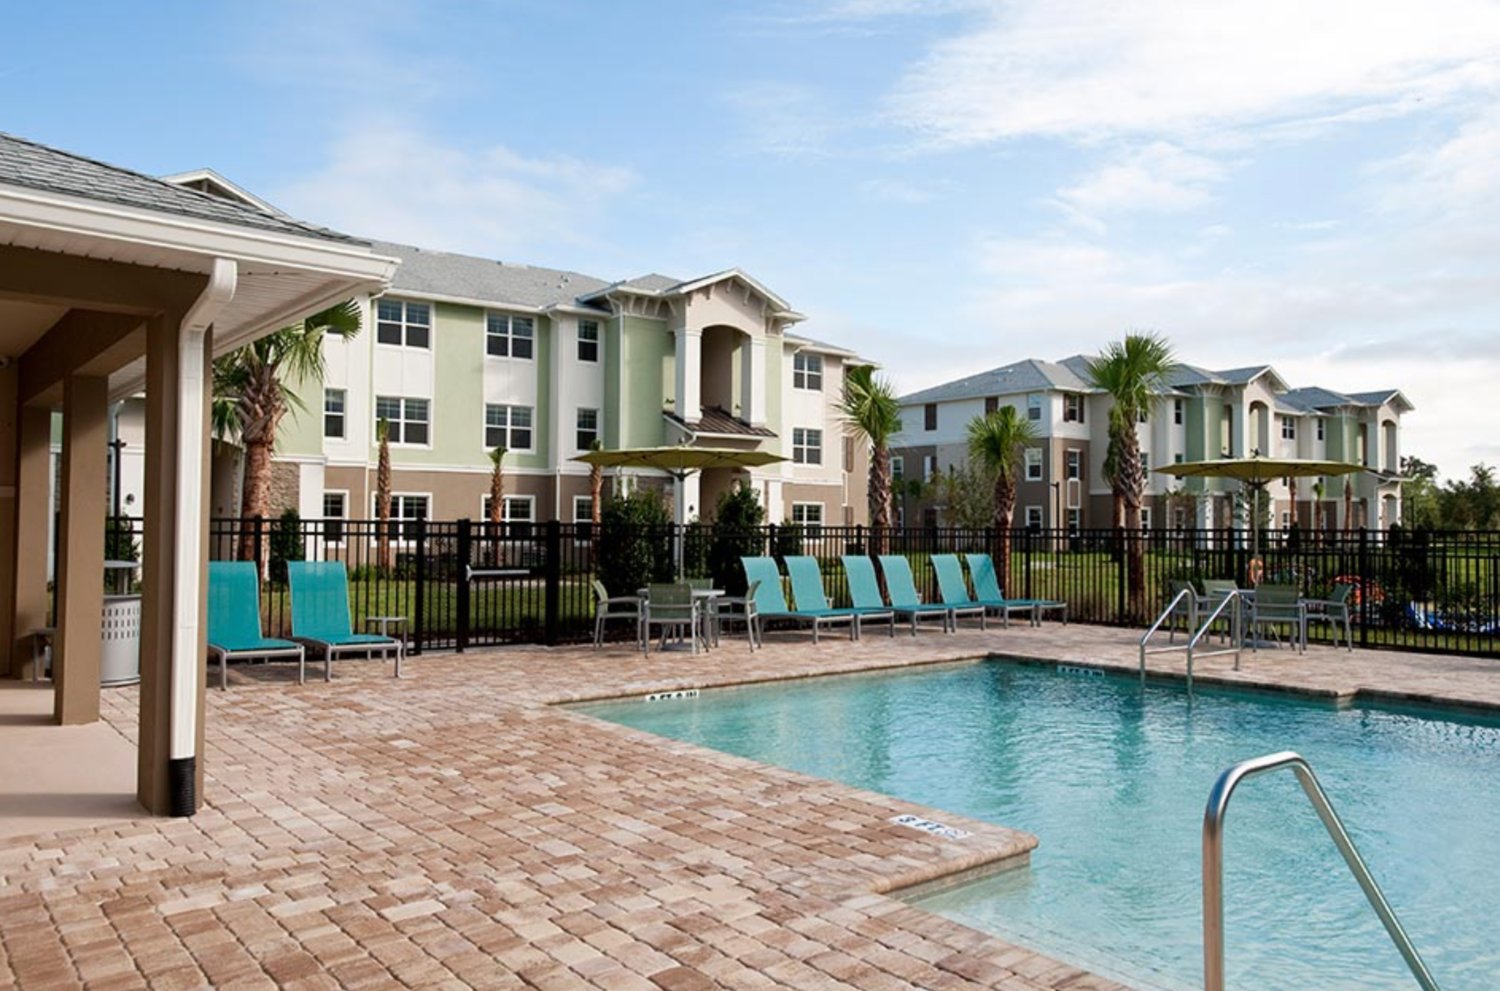 Wellington Park Apartments in Apopka were developed by Wendover Housing Partners.